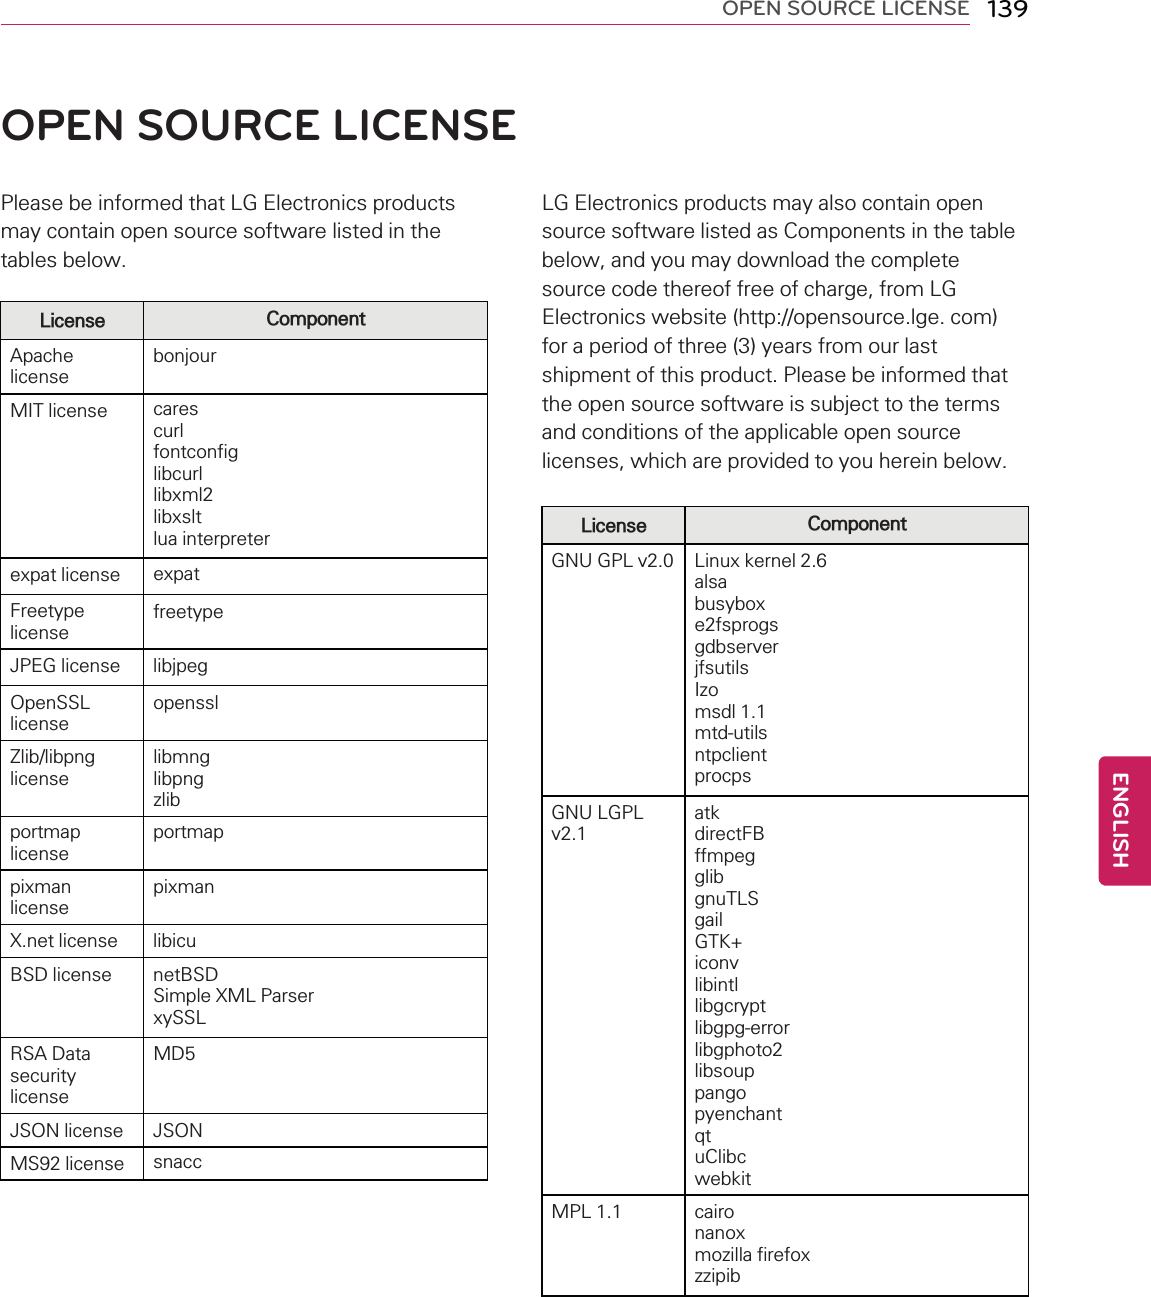 OPEN SOURCE LICENSE 139OPEN SOURCE LICENSEPlease be informed that LG Electronics productsmay contain open source software listed in thetables below.License ComponentApachelicensebonjourMIT license carescurlfontconfiglibcurllibxml2libxsltlua interpreterexpat license expatFreetypelicensefreetypeJPEG license libjpegOpenSSLlicenseopensslZlib/libpnglicenselibmnglibpngzlibportmaplicenseportmappixmanlicensepixmanX.net license libicuBSD license netBSDSimple XML ParserxySSLRSA DatasecuritylicenseMD5JSON license JSONMS92 license snaccLG Electronics products may also contain opensource software listed as Components in the tablebelow, and you may download the completesource code thereof free of charge, from LGElectronics website (http://opensource.lge. com)for a period of three (3) years from our lastshipment of this product. Please be informed thatthe open source software is subject to the termsand conditions of the applicable open sourcelicenses, which are provided to you herein below.License ComponentGNU GPL v2.0 Linux kernel 2.6alsabusyboxe2fsprogsgdbserverjfsutilsIzomsdl 1.1mtd-utilsntpclientprocpsGNU LGPLv2.1atkdirectFBffmpegglibgnuTLSgailGTK+iconvlibintllibgcryptlibgpg-errorlibgphoto2libsouppangopyenchantqtuClibcwebkitMPL 1.1 caironanoxmozilla firefoxzzipibENGLISH